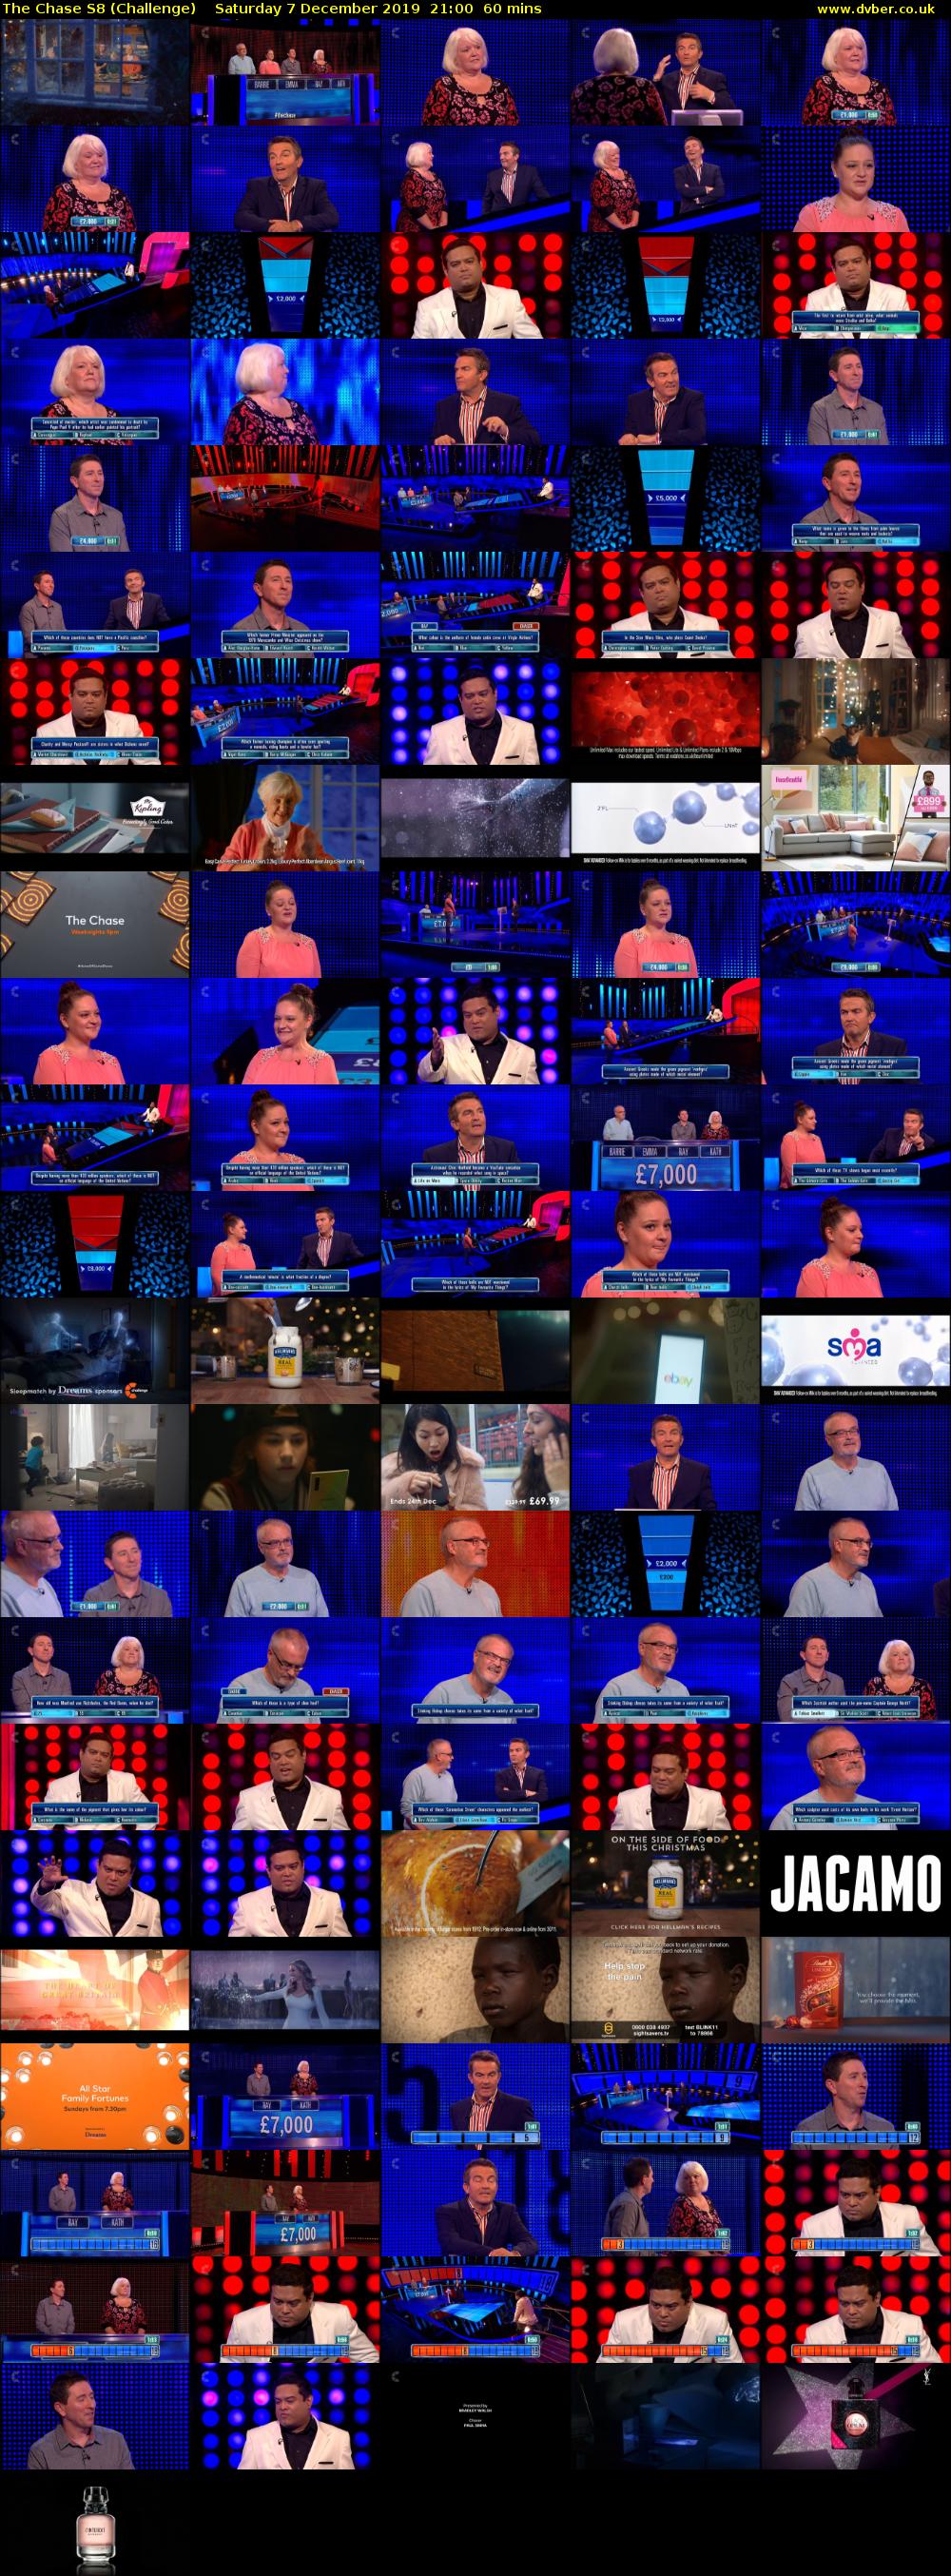 The Chase S8 (Challenge) Saturday 7 December 2019 21:00 - 22:00